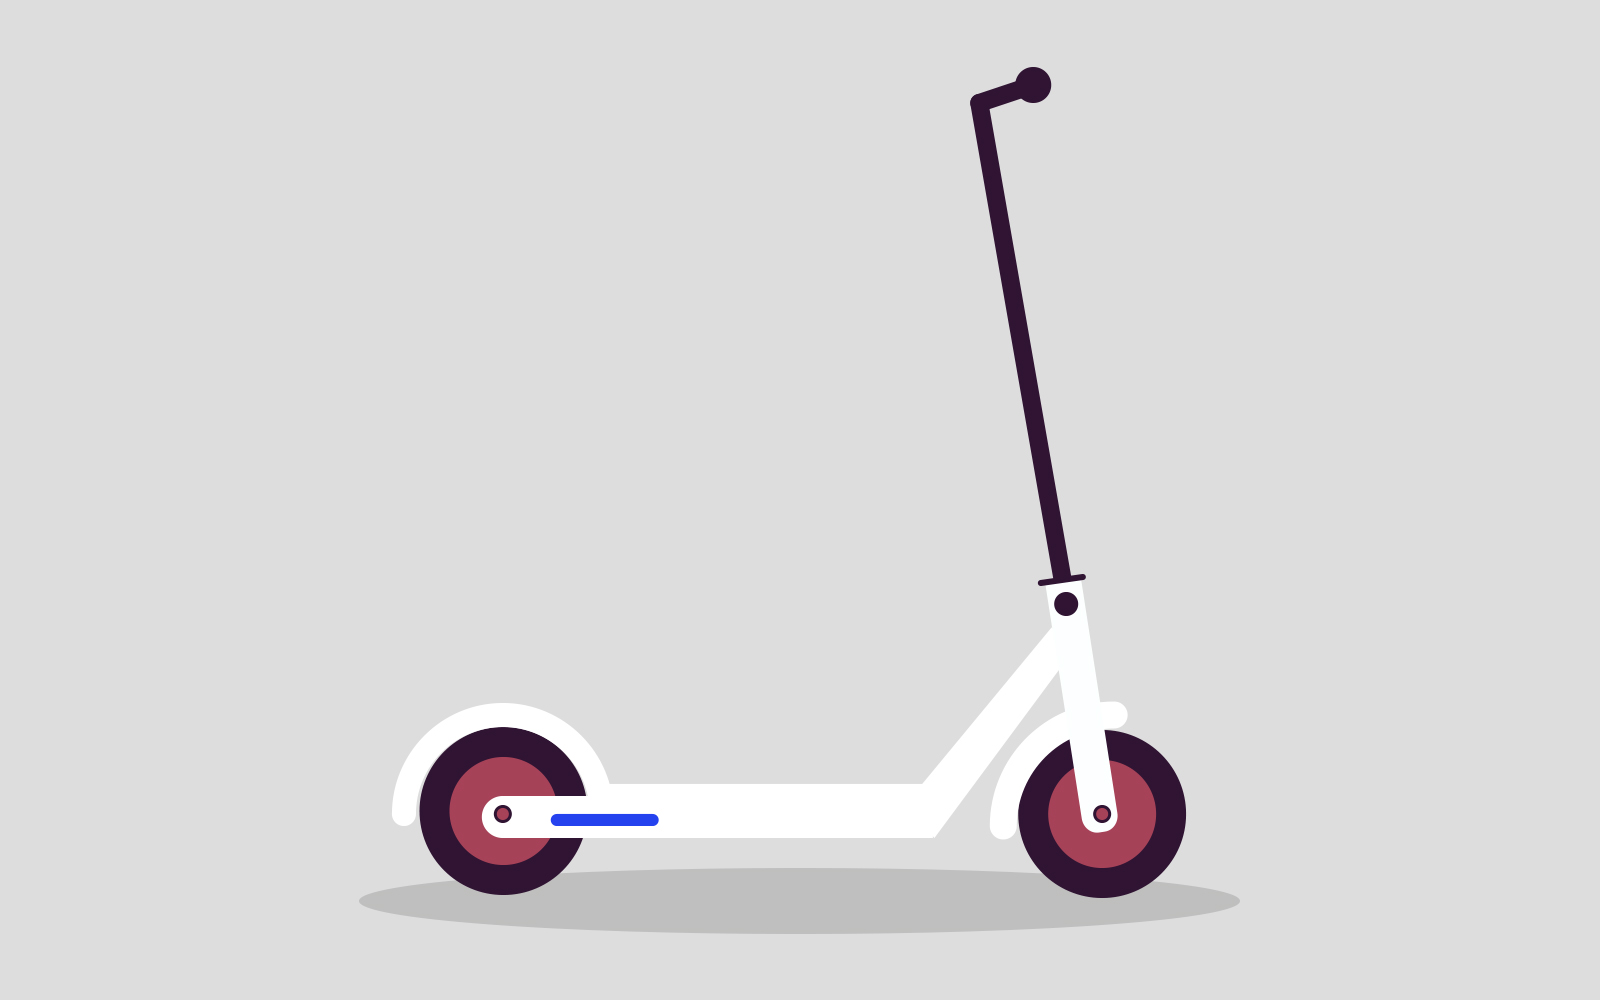 Children's Electric Scooter Illustration Cartoon Style